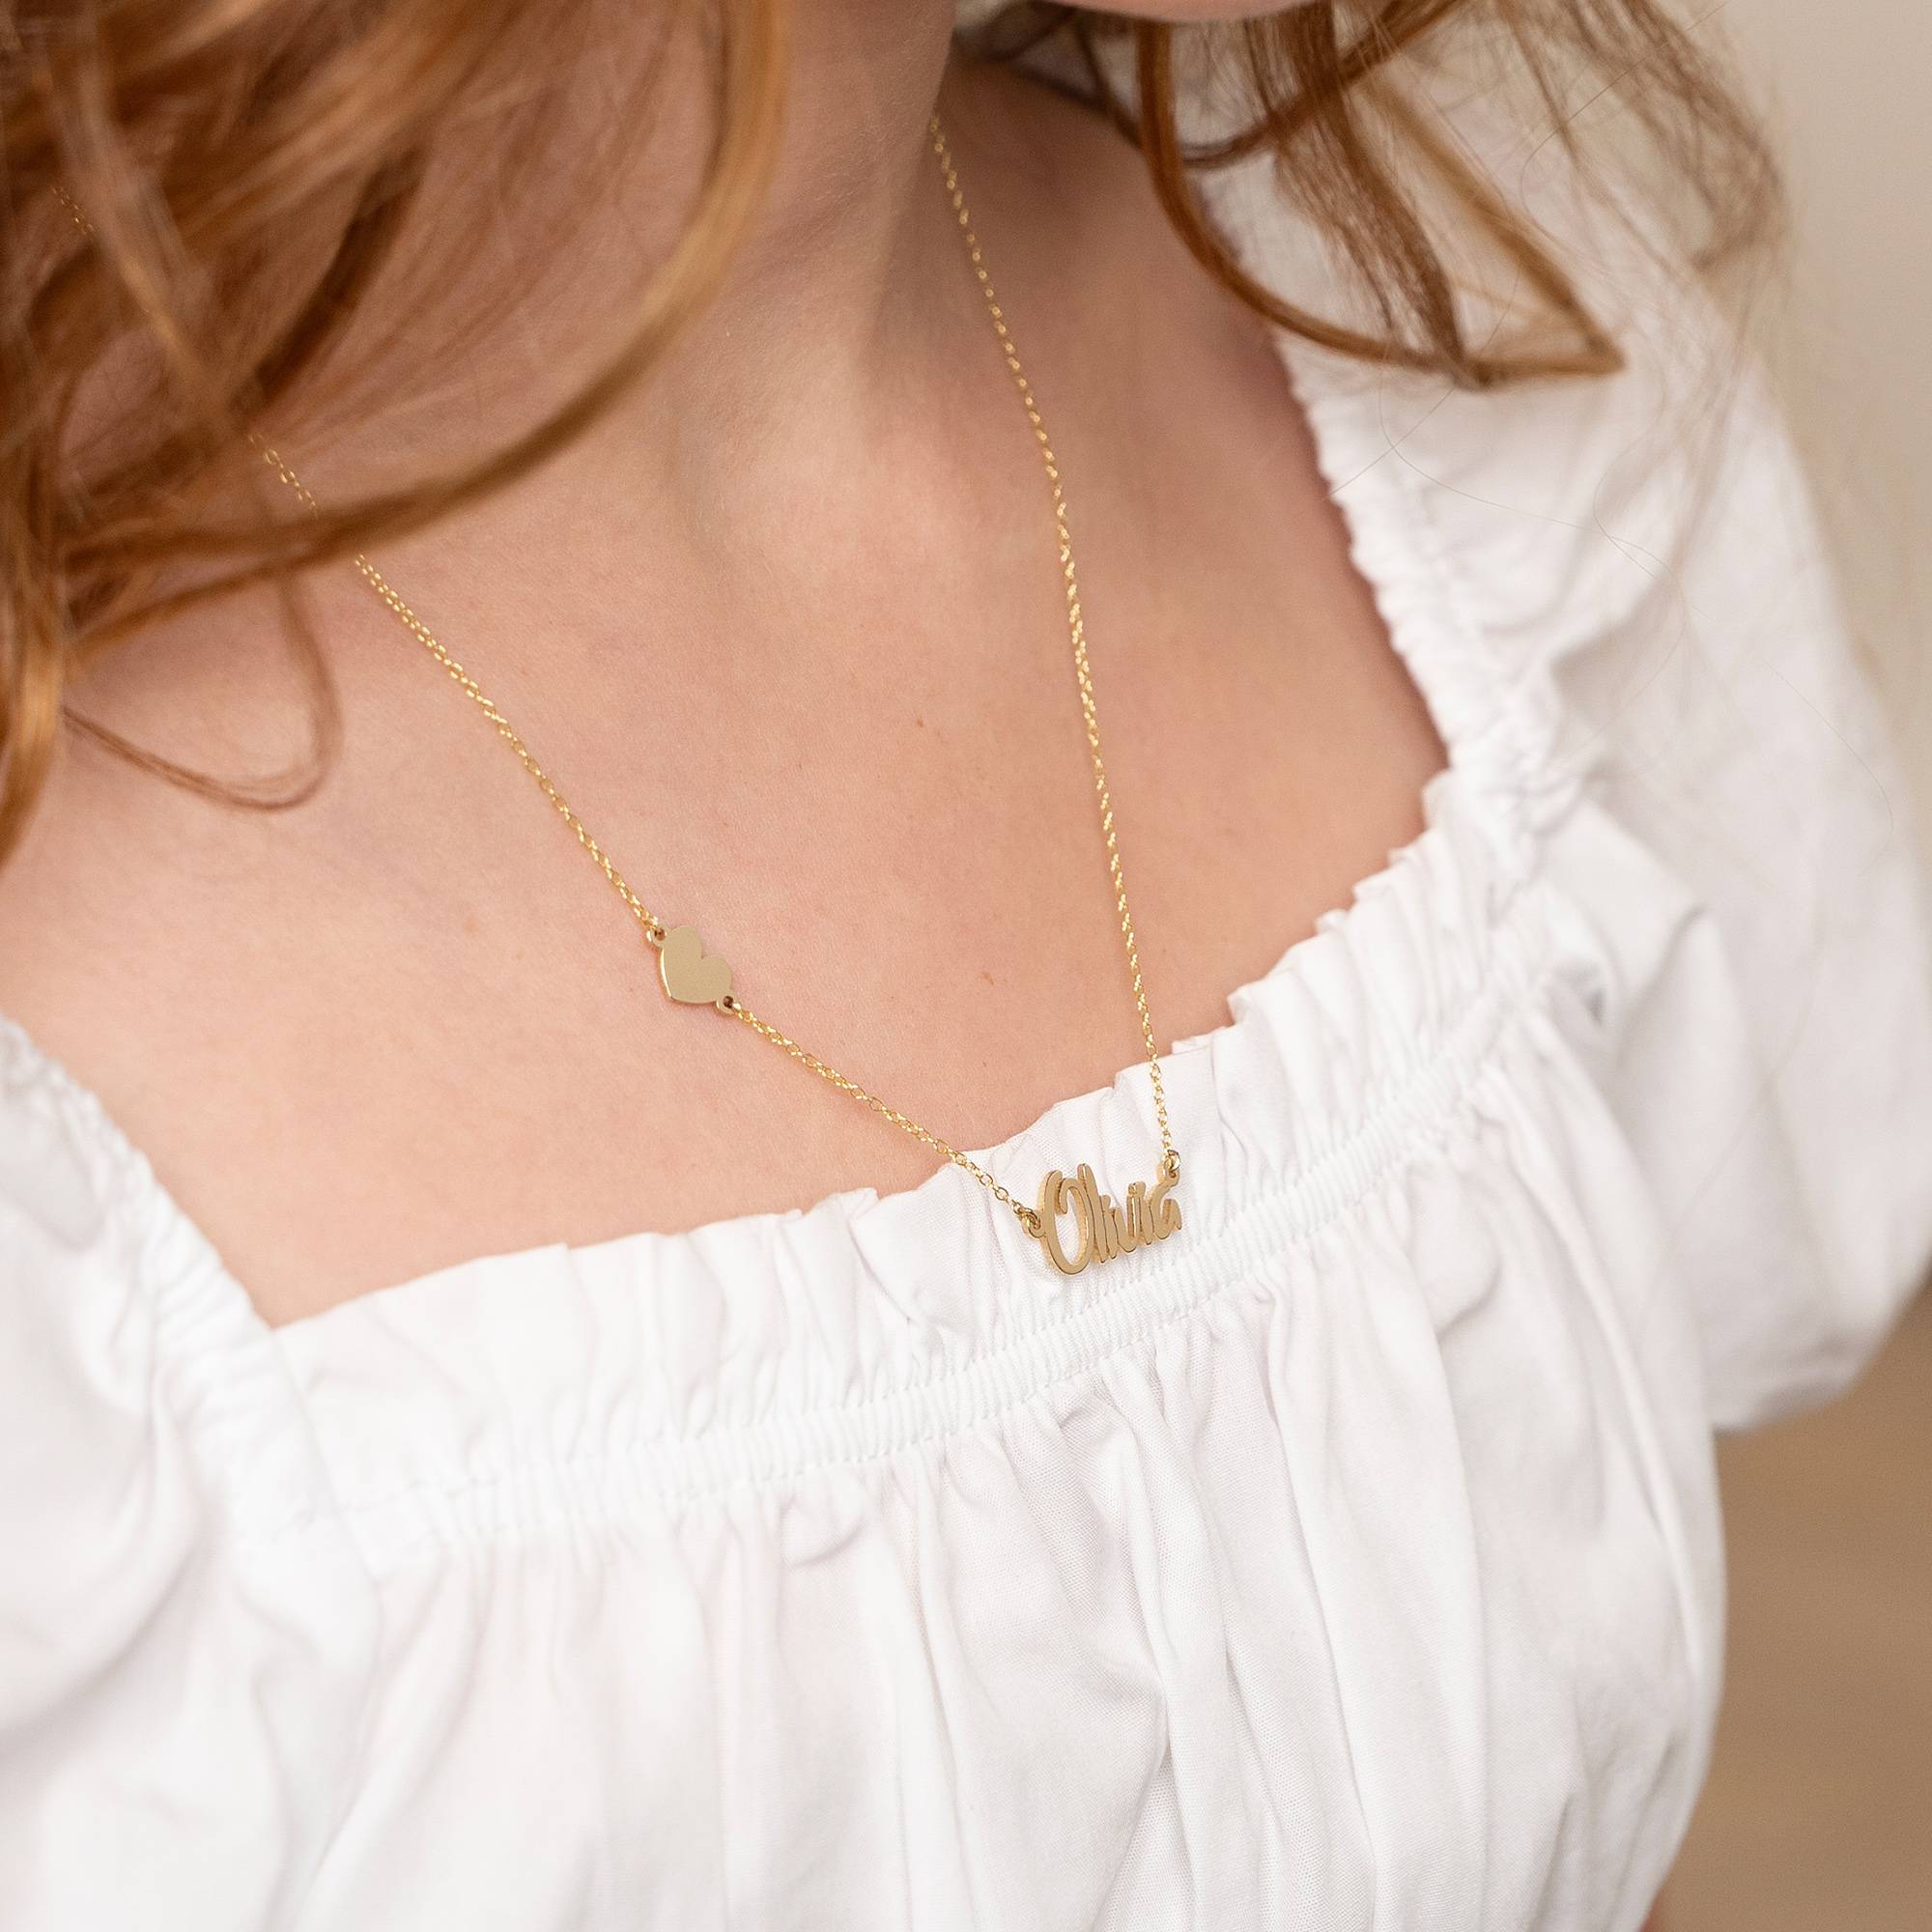 Charlotte Symbol Name Necklace in 14K Yellow Gold-2 product photo